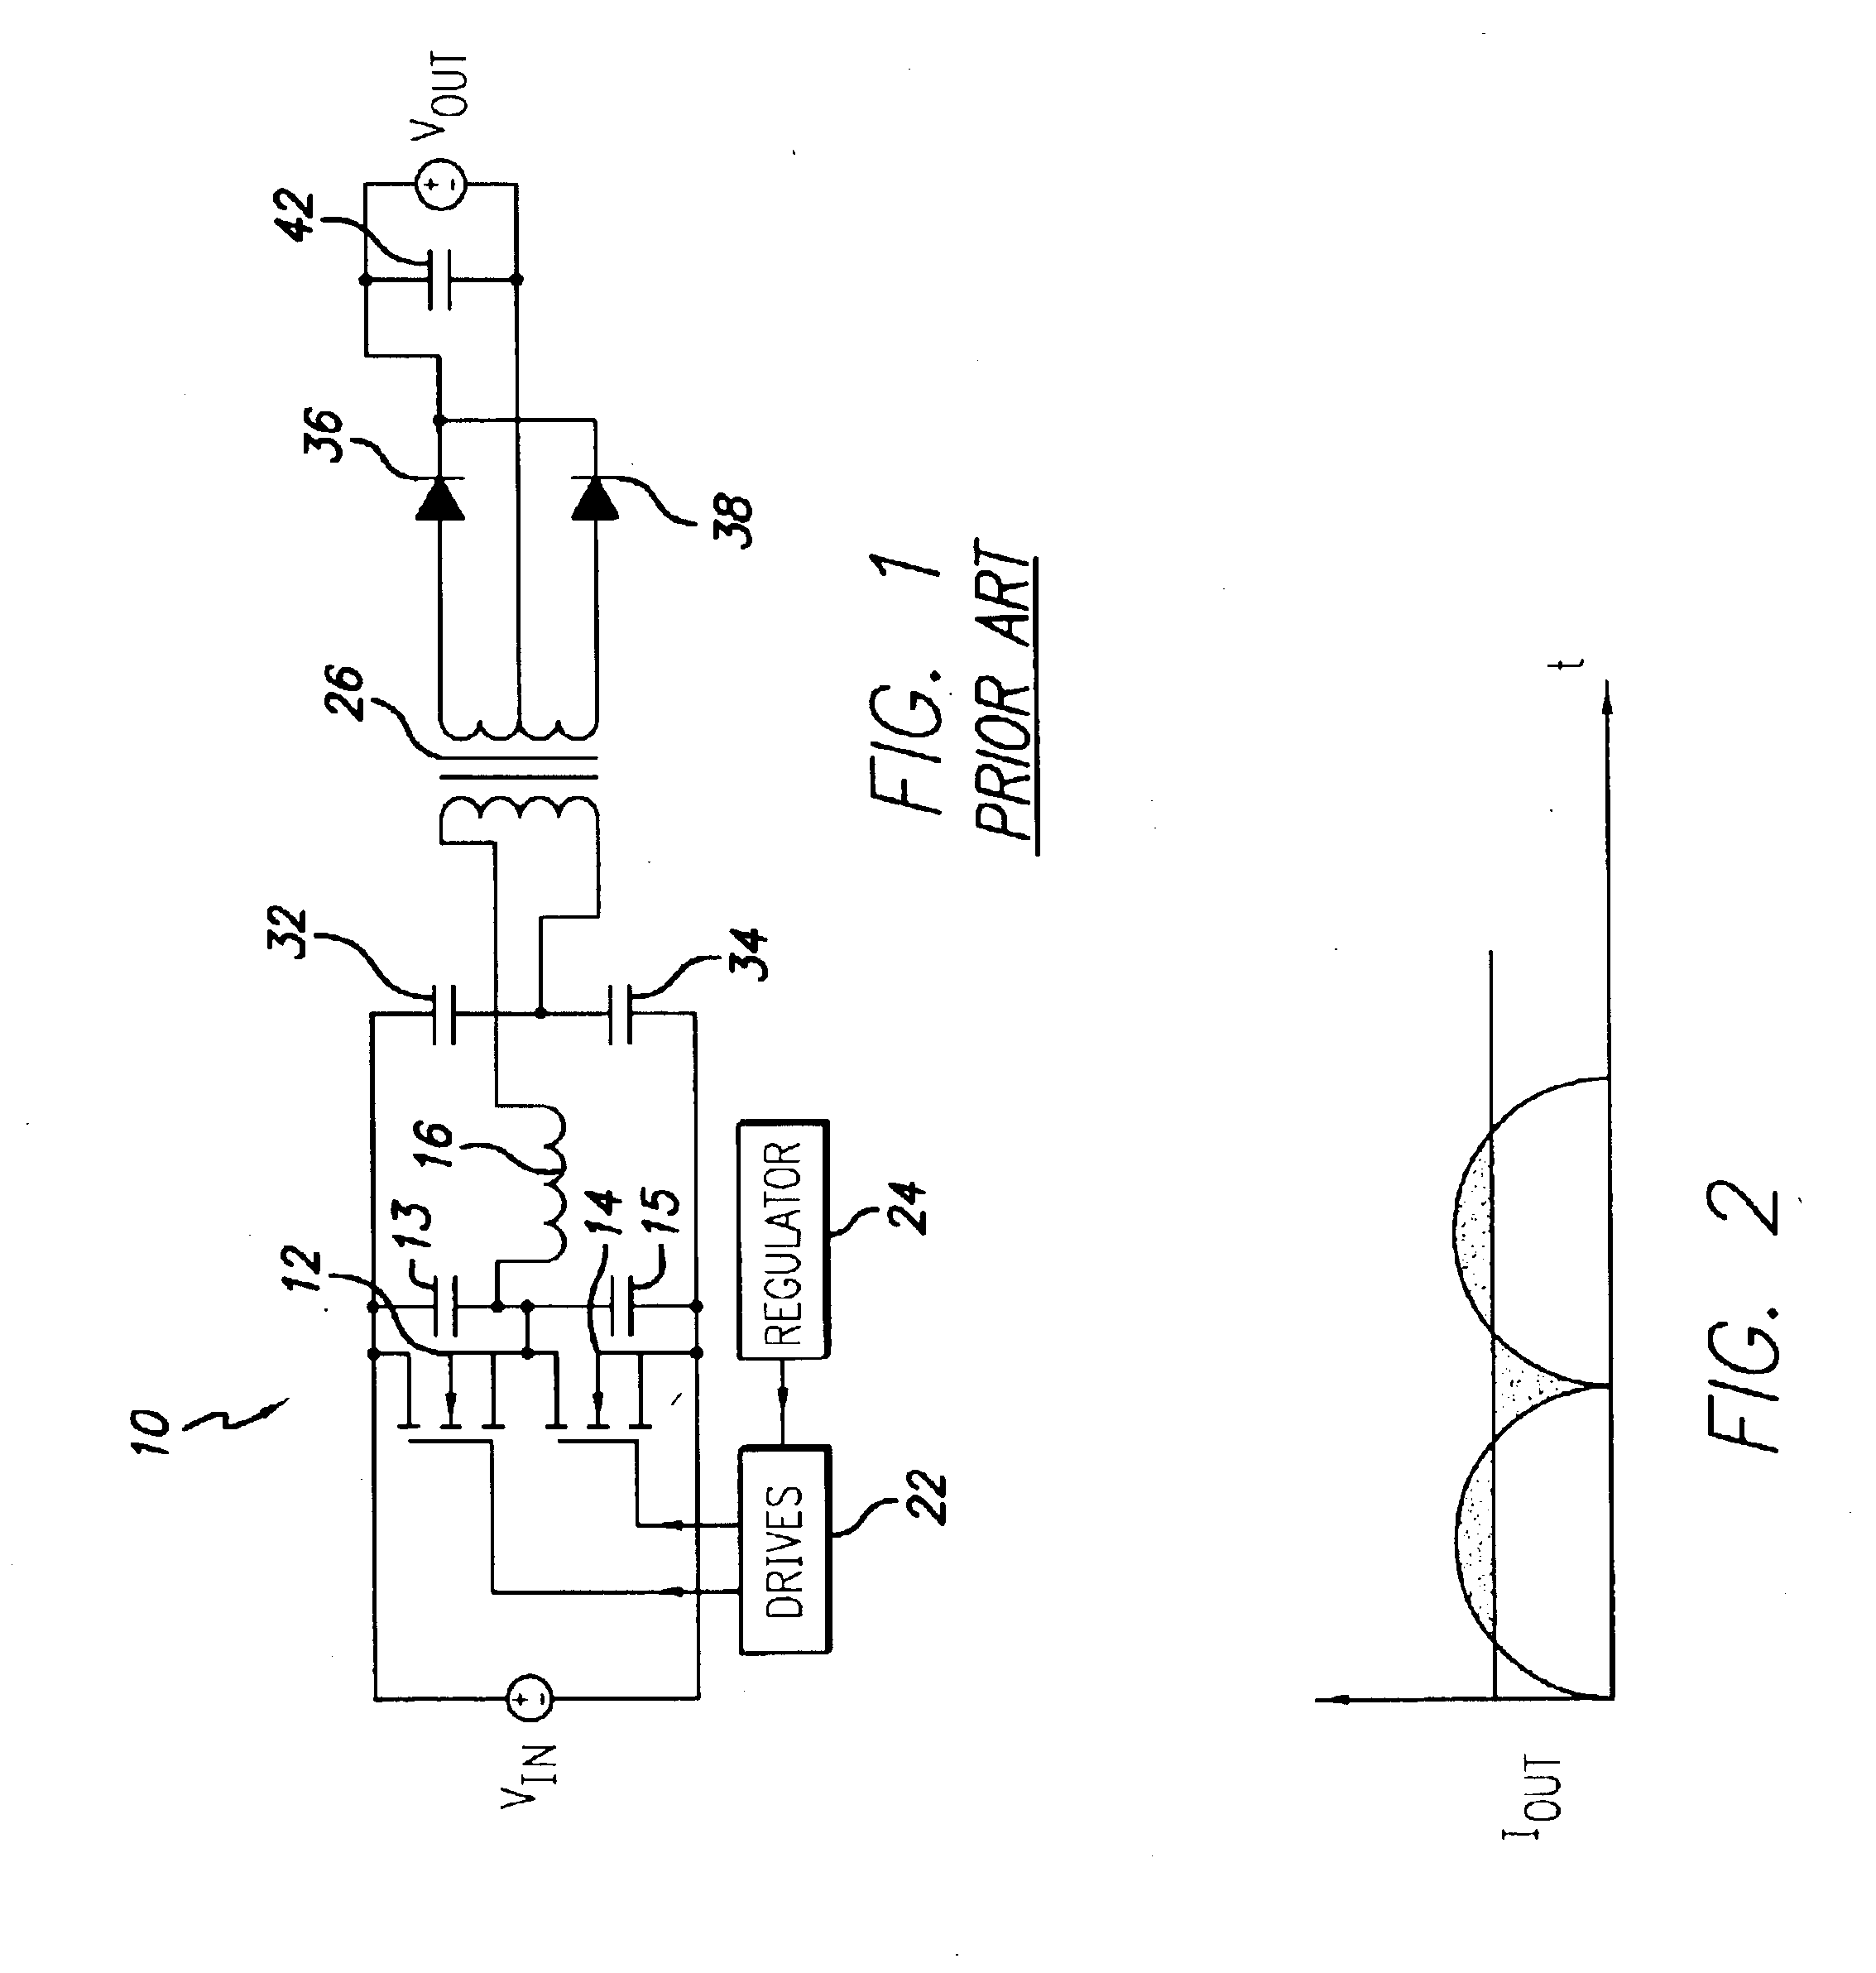 Phase-shifted resonant converter having reduced output ripple